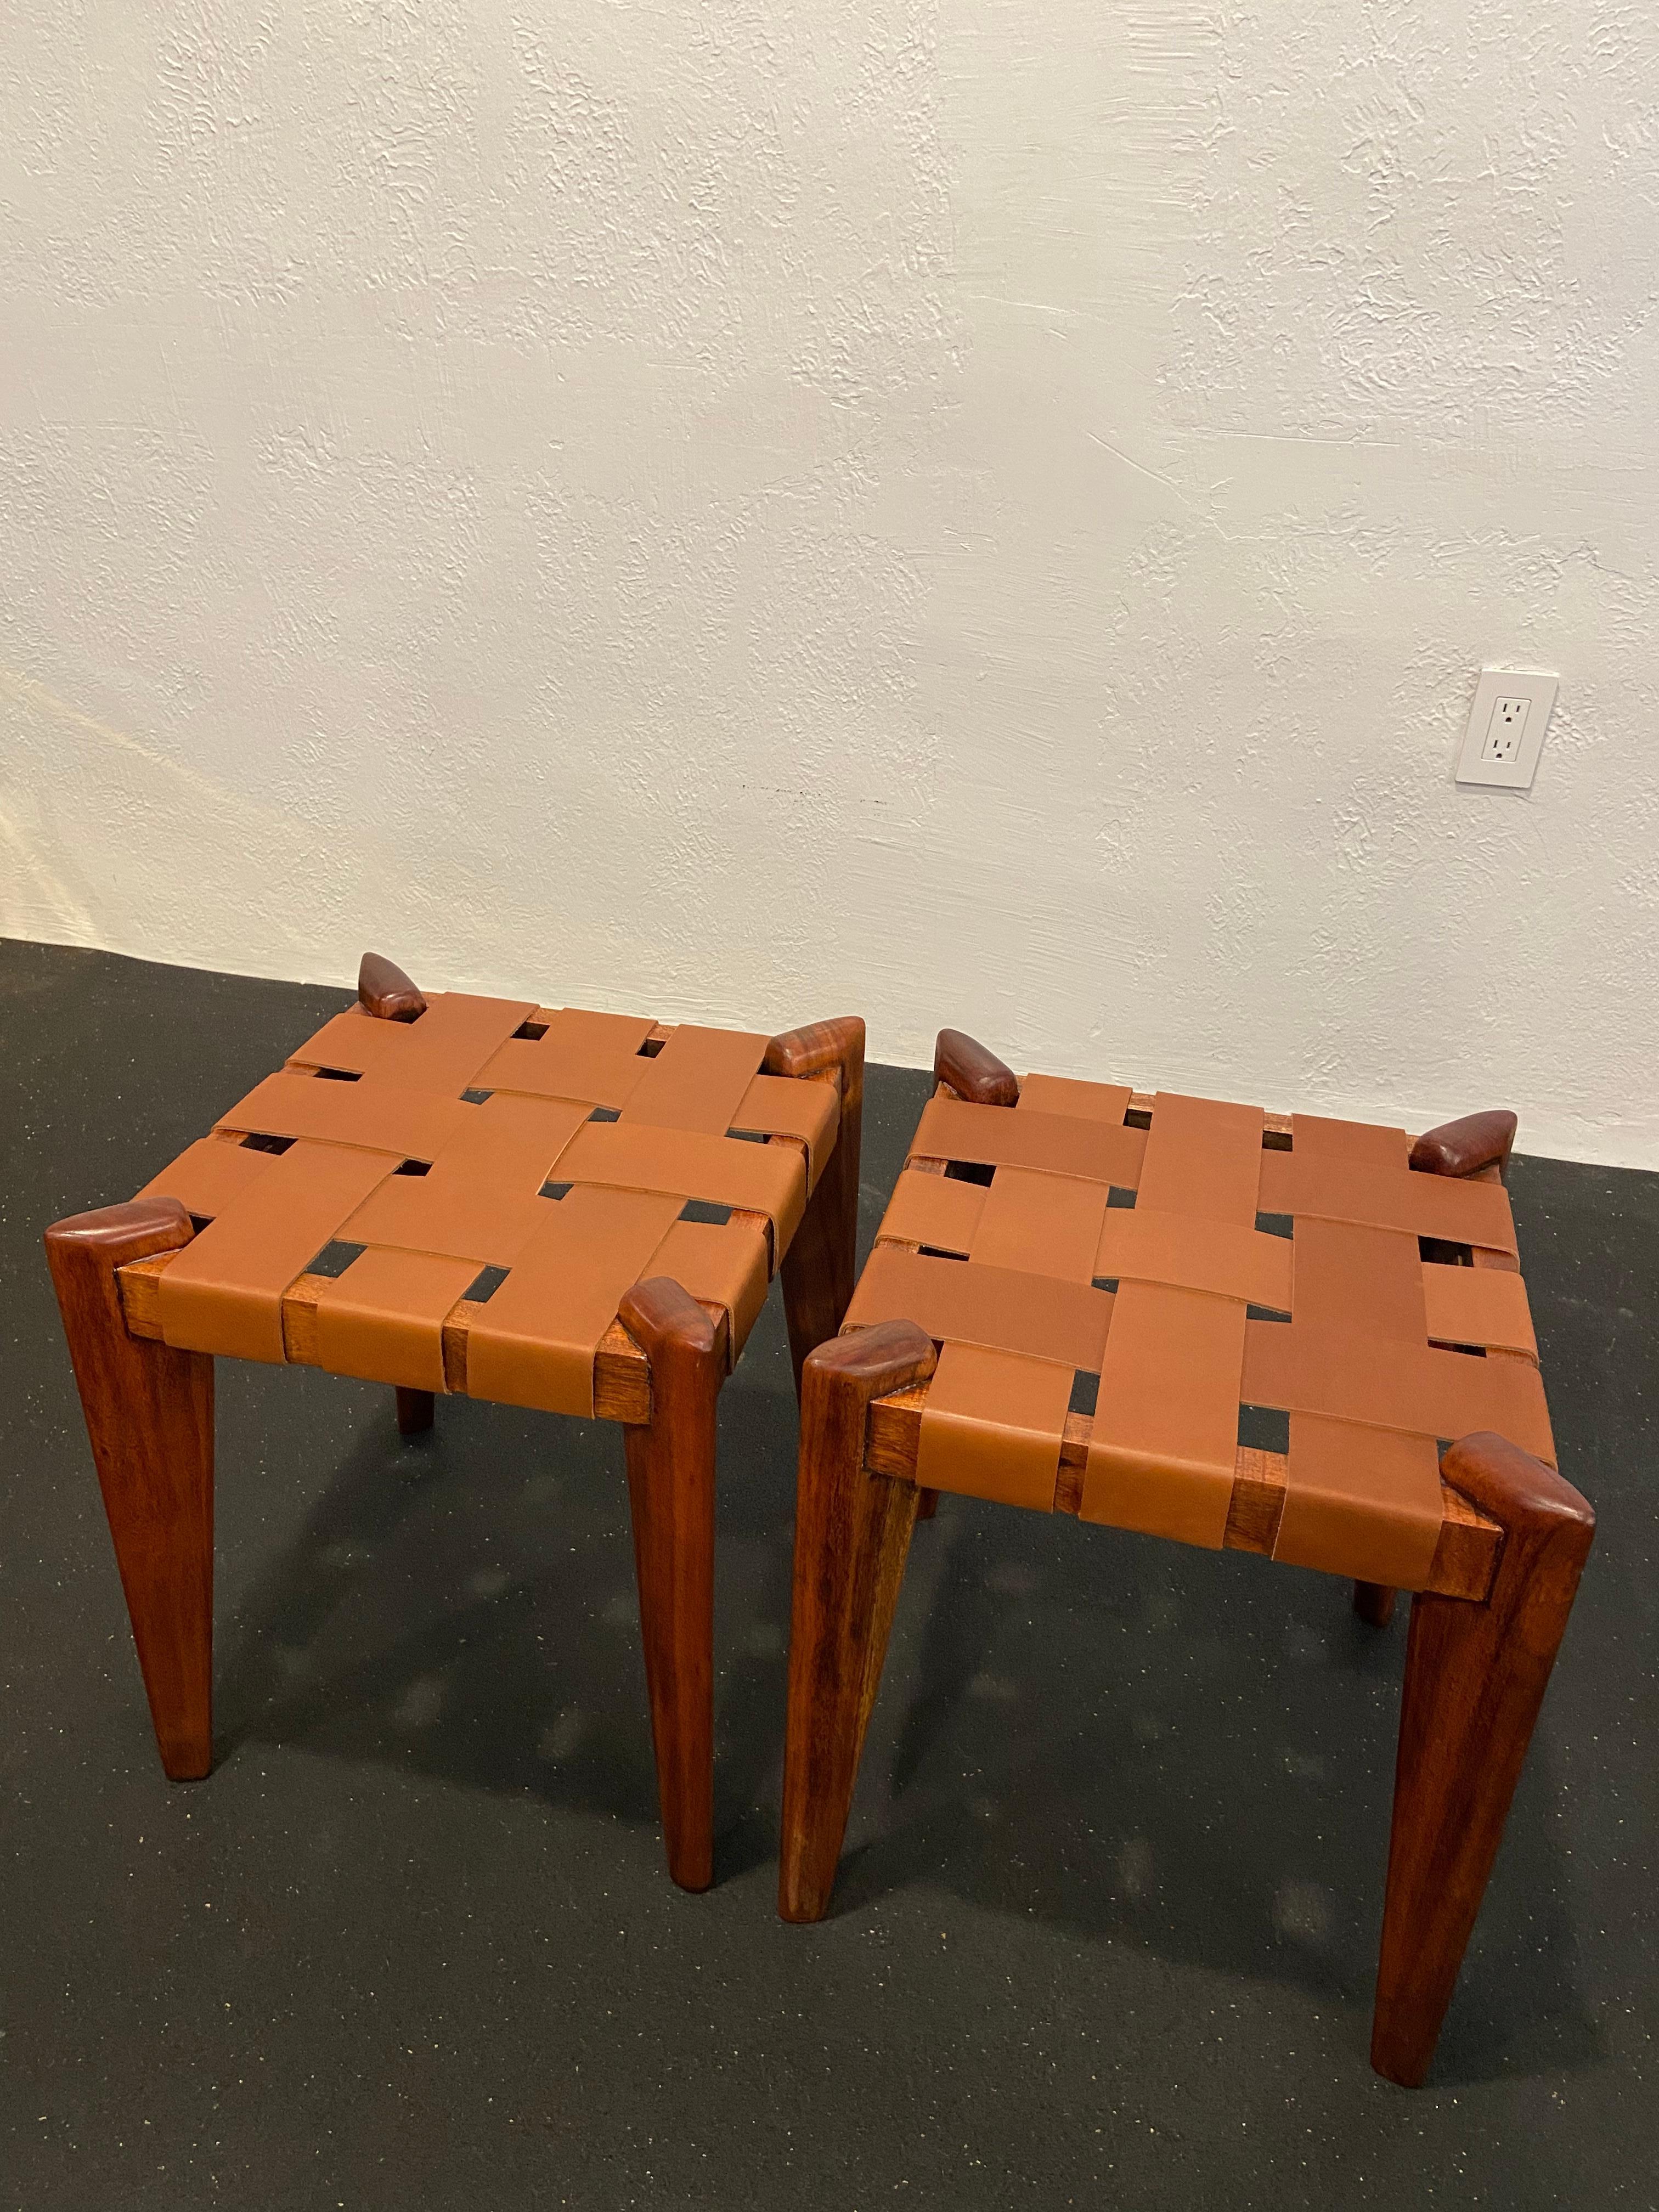 Edmond Spence Woven Leather Stools-a Pair In Good Condition For Sale In West Palm Beach, FL